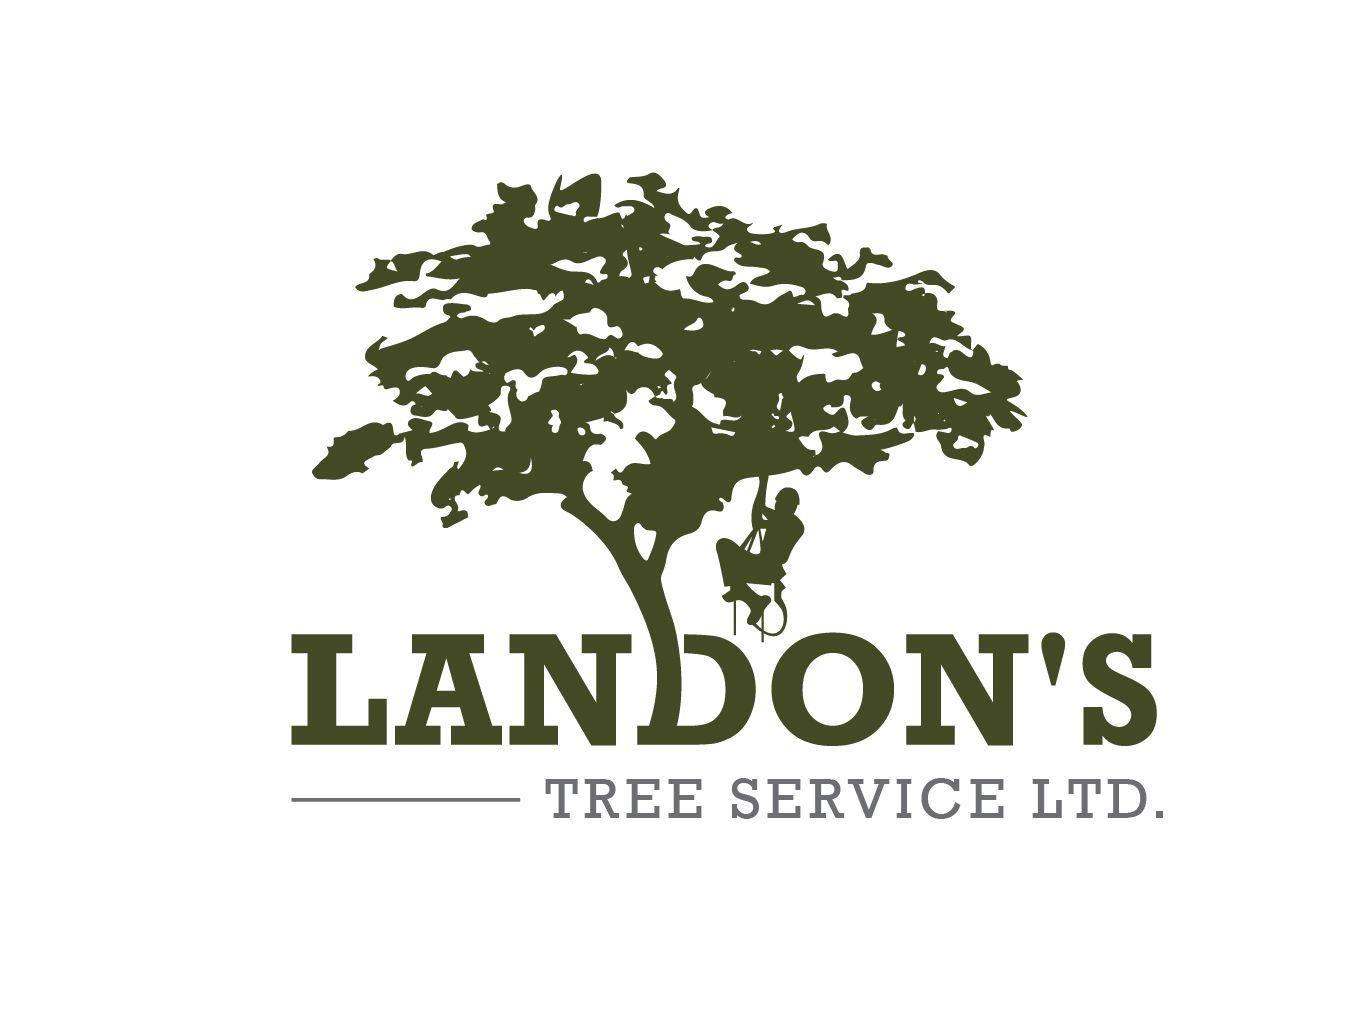 Tree Service Logo - 36 Serious Logo Designs | It Company Logo Design Project for ...